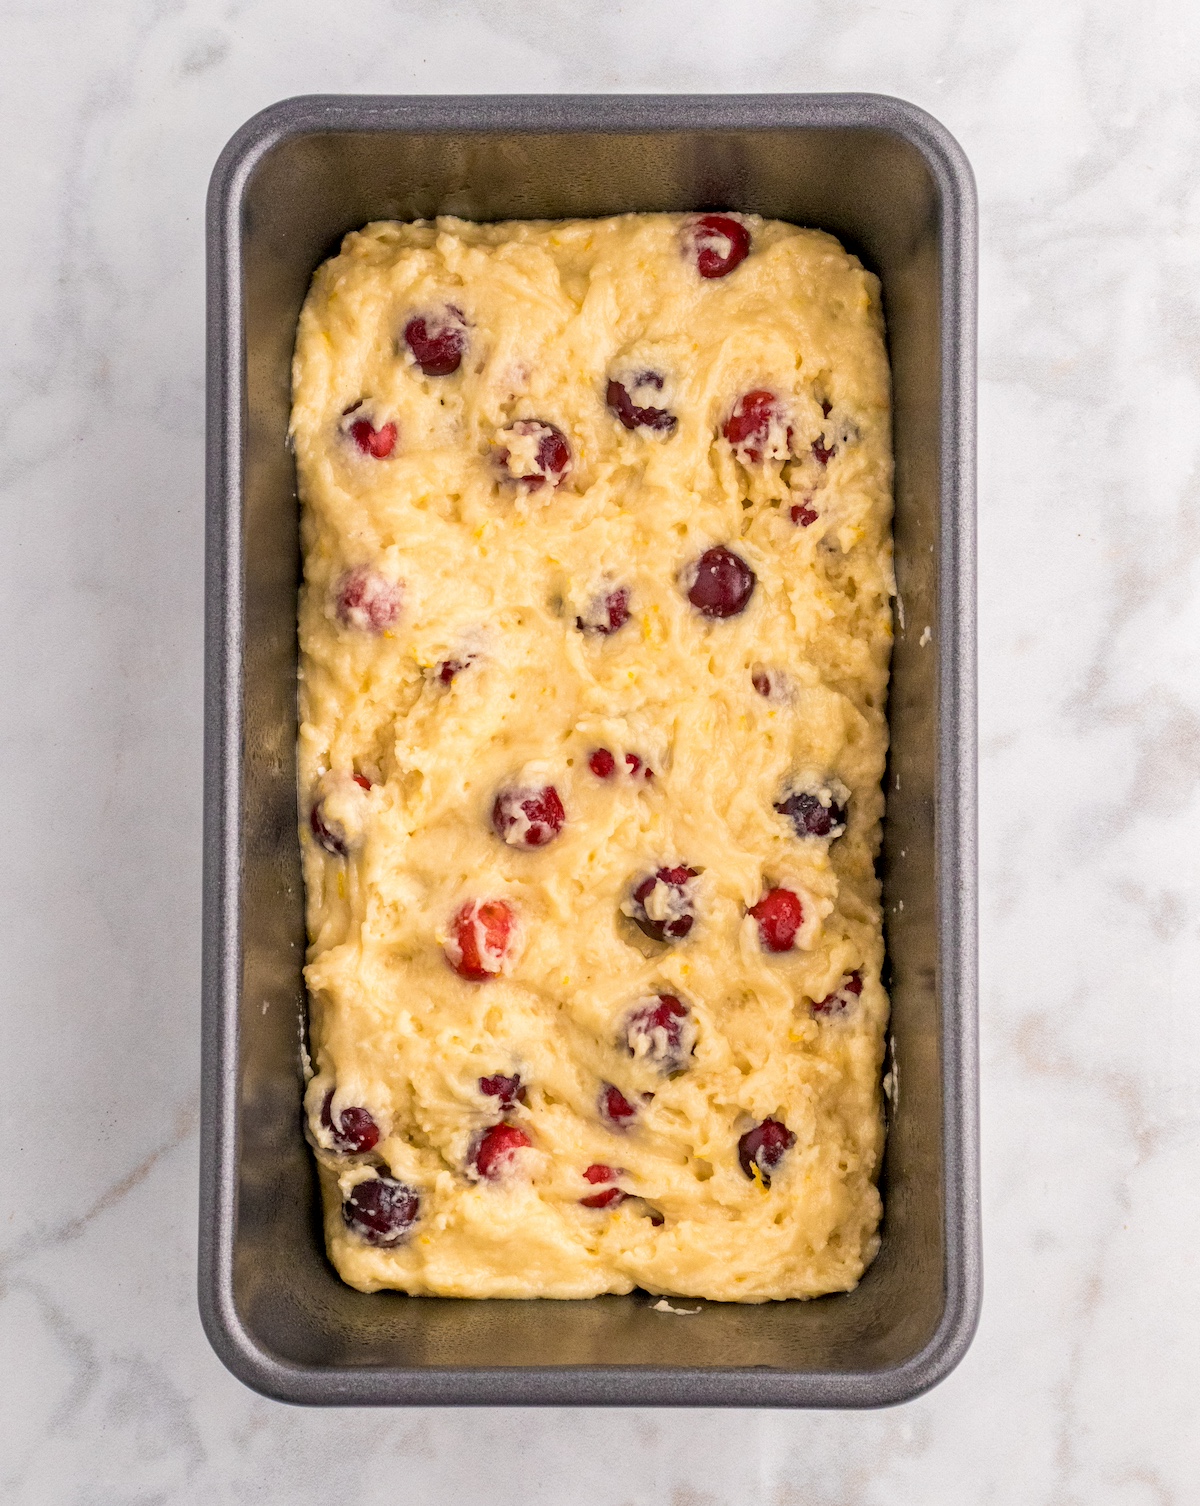 Added batter to a loaf pan with cranberries sprinkled on top